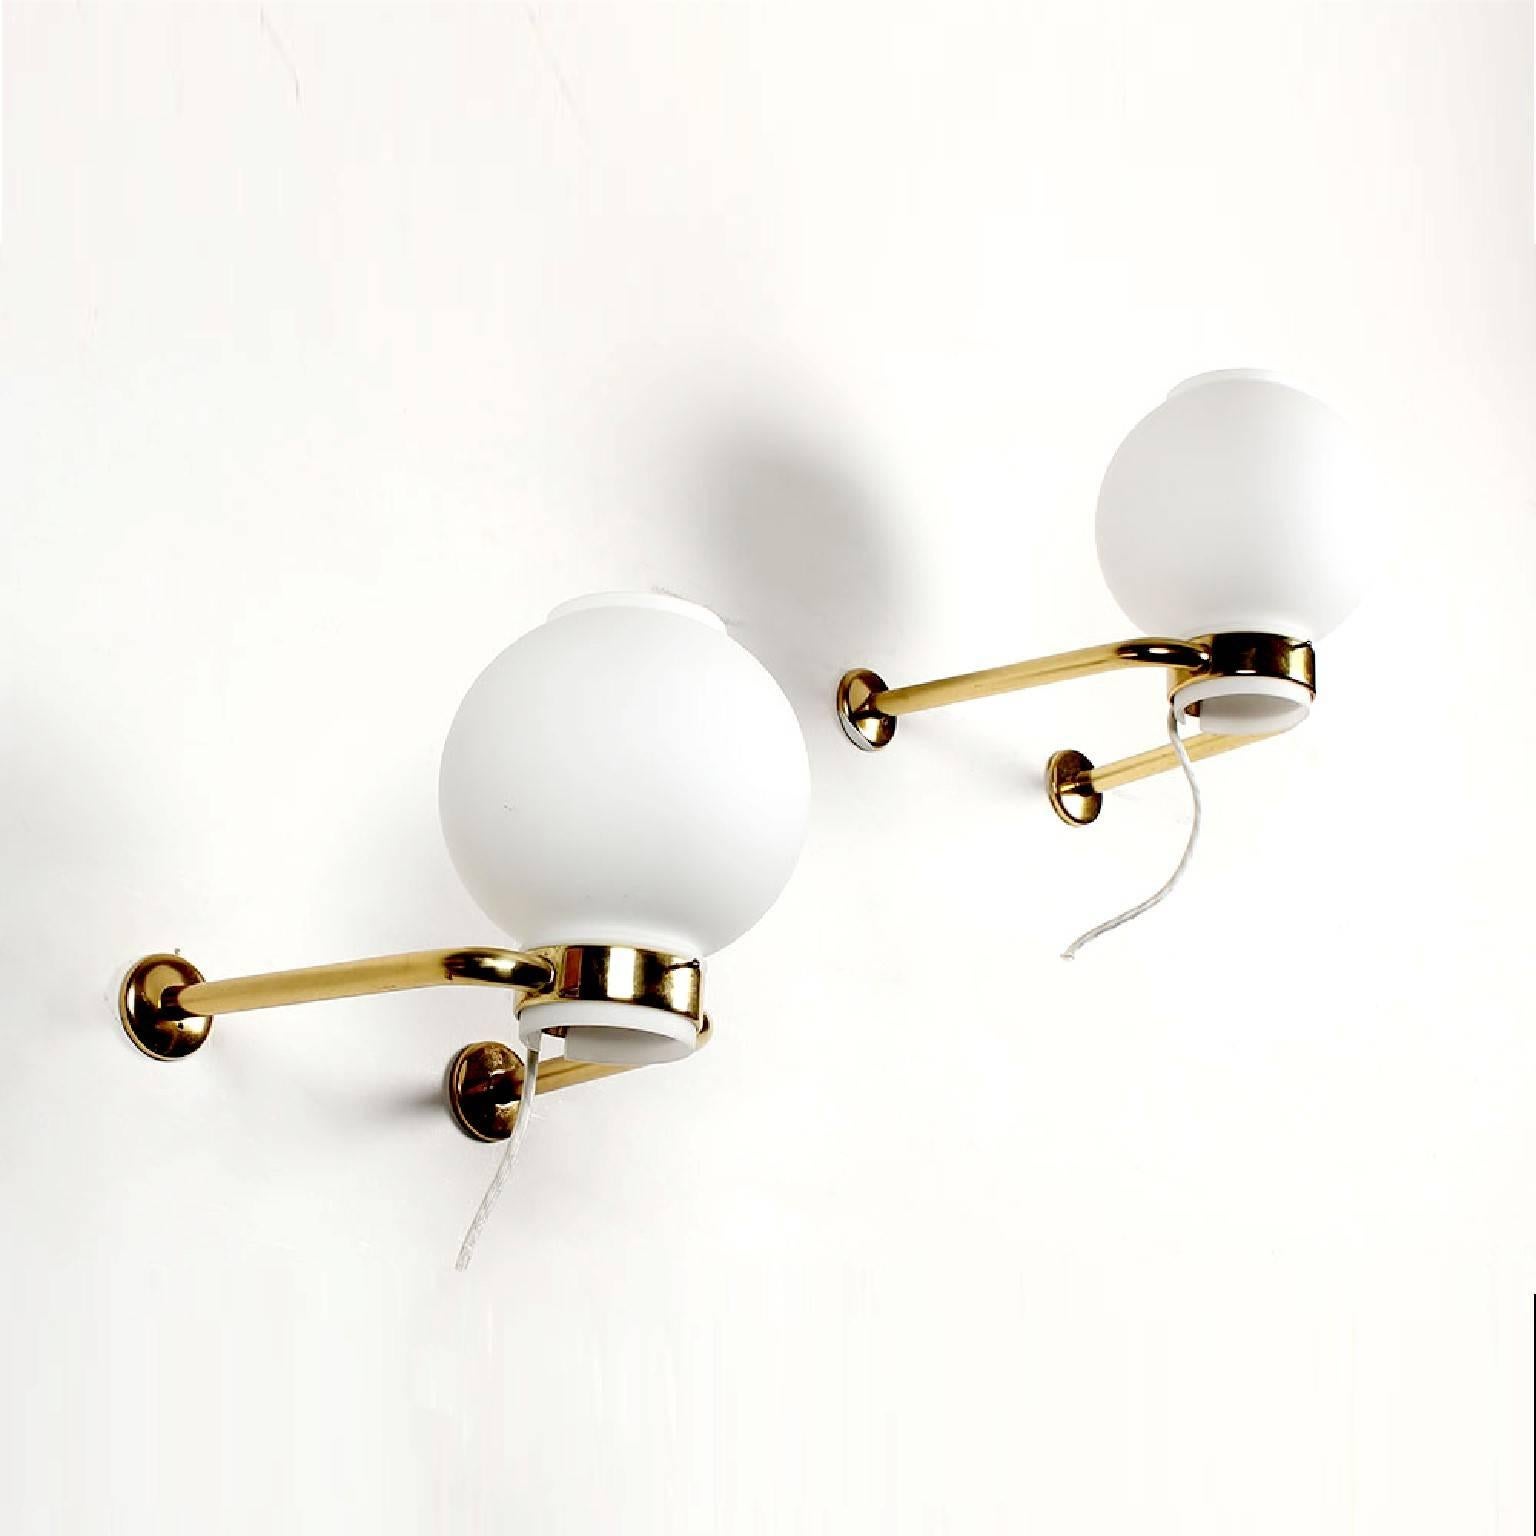 Palle Suenson wall lights.

Made exclusively for the executive office at Aarhus Oil Factory A/S.,

Denmark, circa 1960 (installed c 20 years after the building was designed).

Measure: W: 24cm, H: 30cm, D: 35cm.

Materials: Brass, and opaque